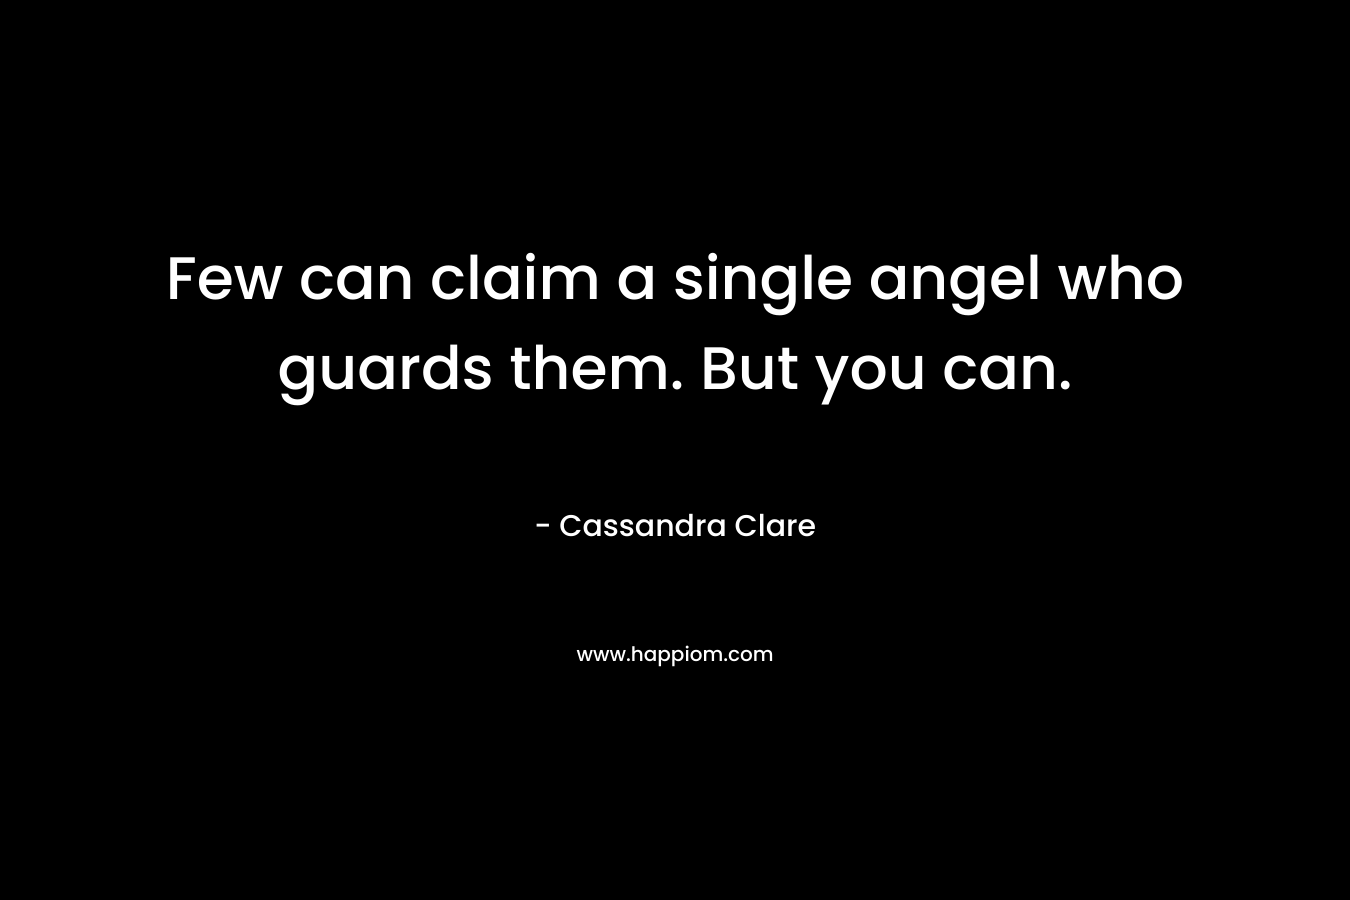 Few can claim a single angel who guards them. But you can. – Cassandra Clare